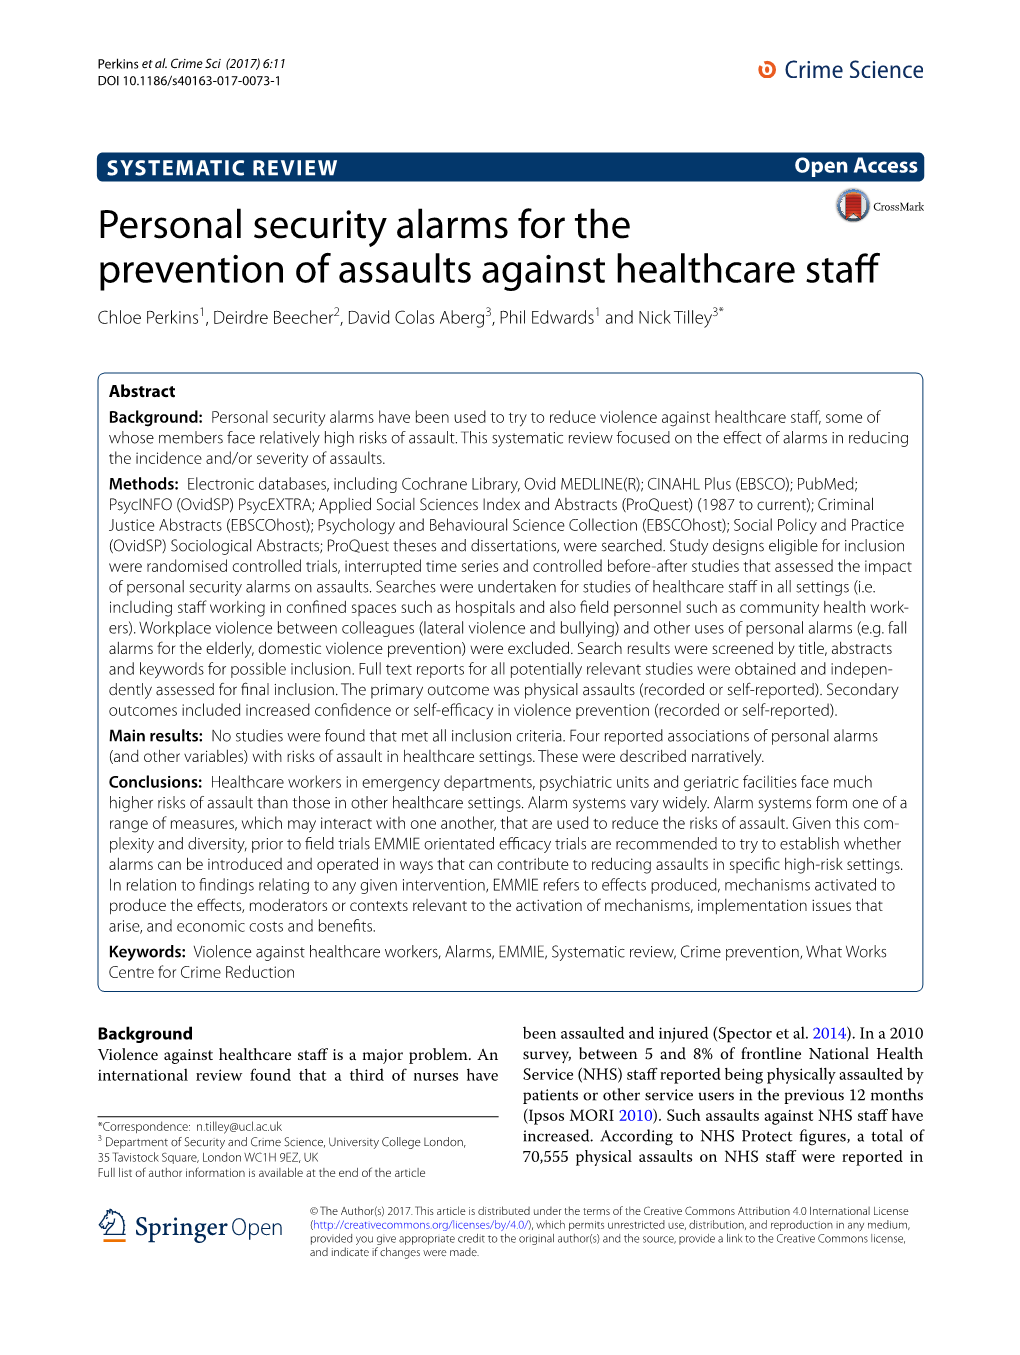 Personal Security Alarms for the Prevention of Assaults Against Healthcare Staf Chloe Perkins1, Deirdre Beecher2, David Colas Aberg3, Phil Edwards1 and Nick Tilley3*